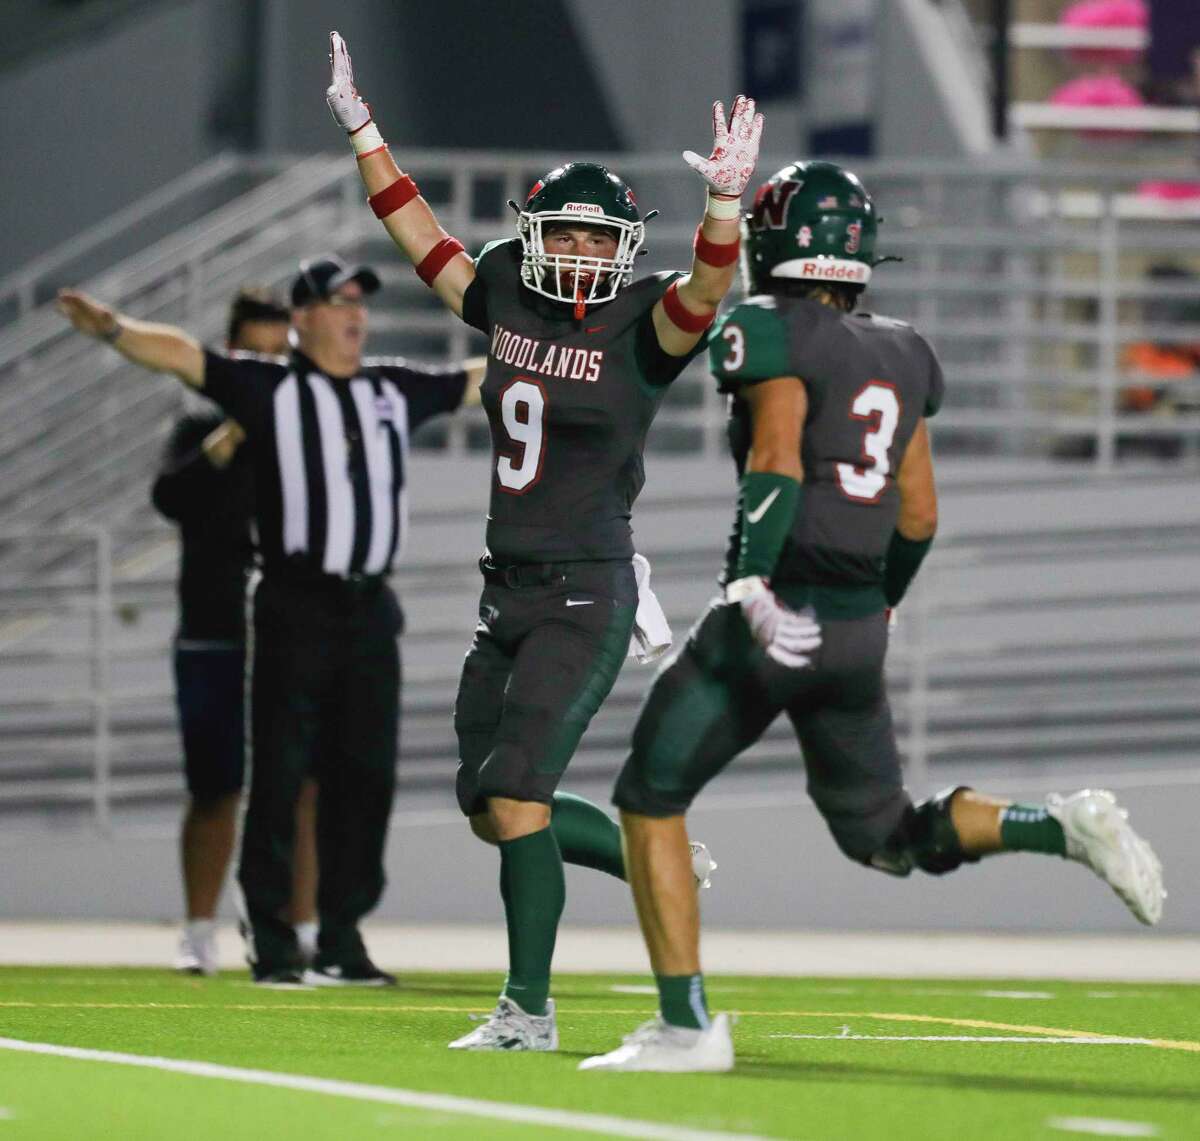 The Woodlands defensive back Harrison DiPasquale (9), shown here earlier this month against Willis, had an interception in Friday night’s win over Grand Oaks.